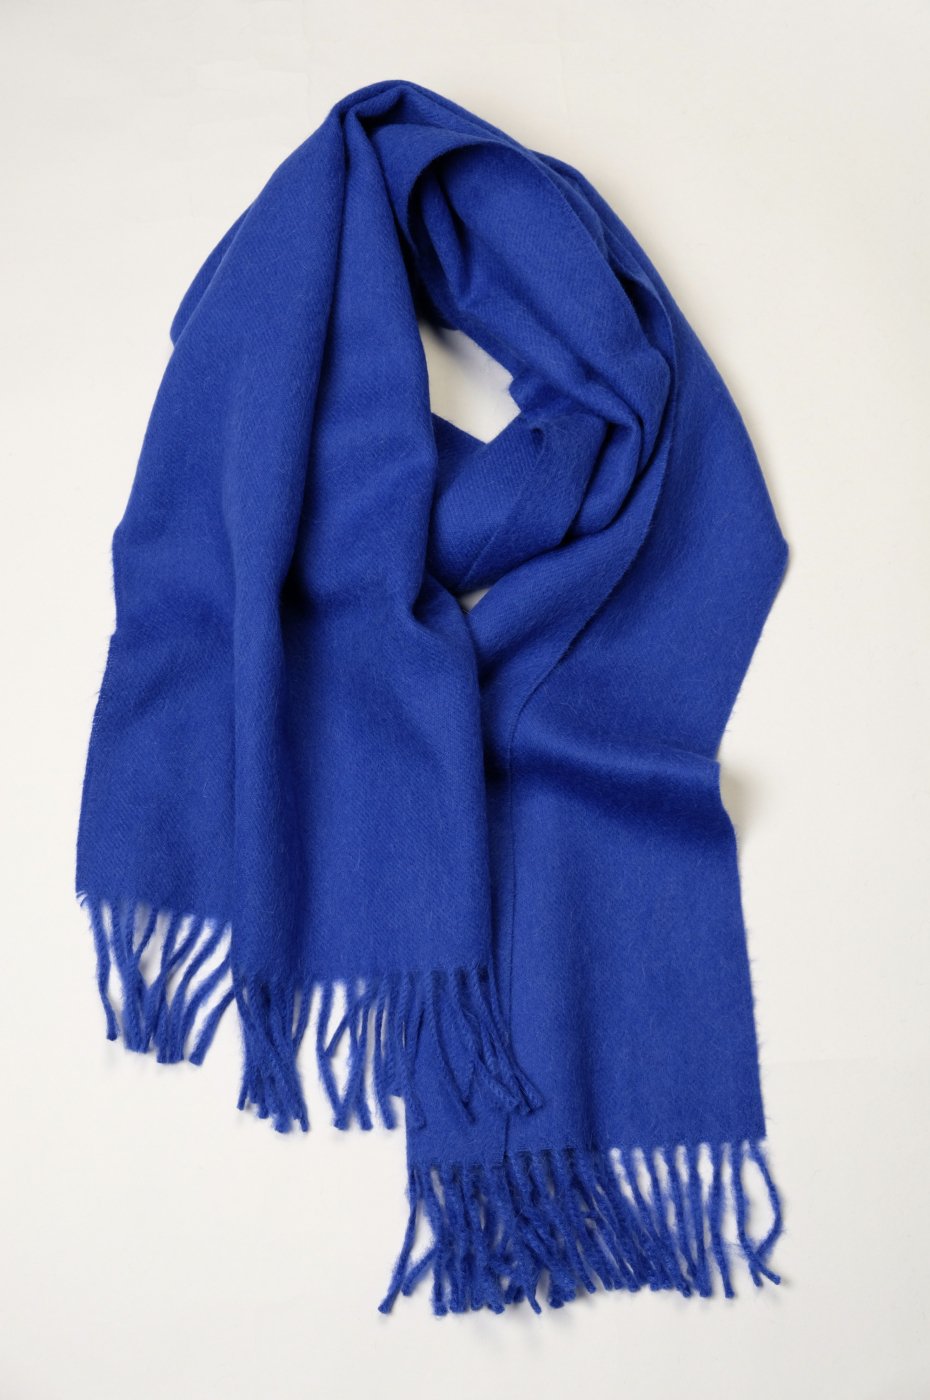 THE INOUE BROTHERS... "BRUSHED SCARF / ELECTRIC BLUE"